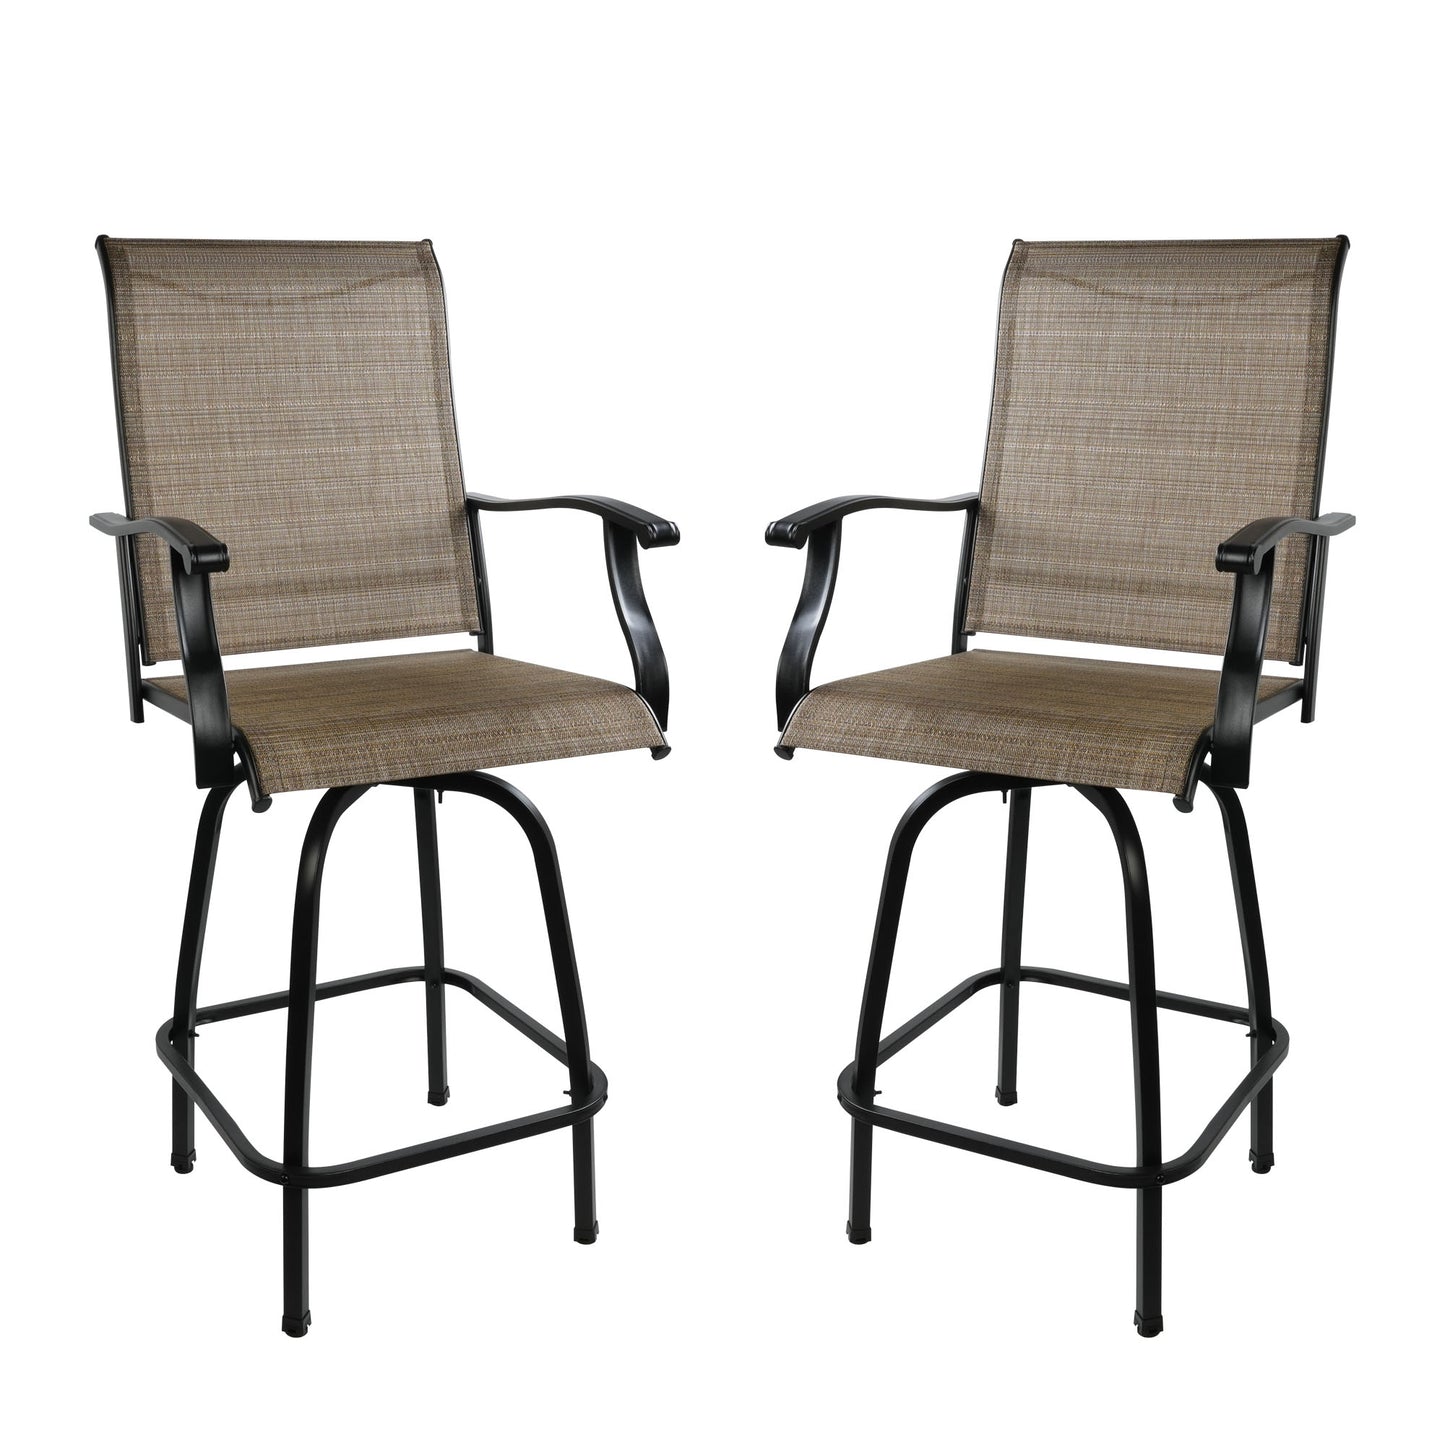 Set of 2 Patio Swivel Bar Stools Outdoor Bar Height Patio Stools Bar Chairs with High Back and Armrest